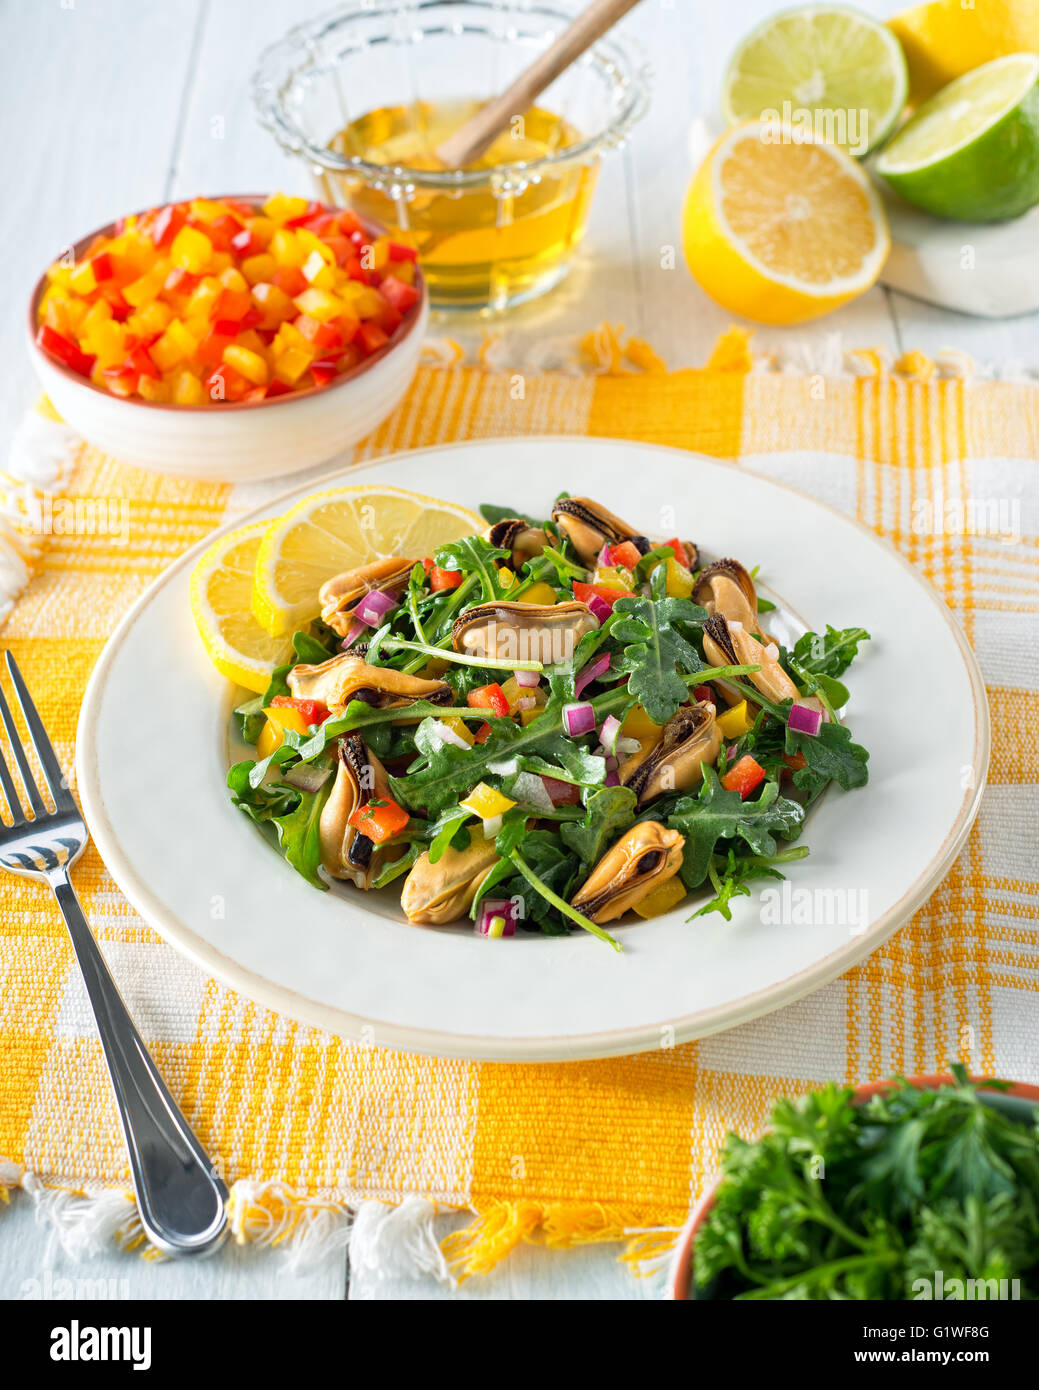 A delicious citrus honey mussel salad with arugula, peppers, lemon, and lime. Stock Photo